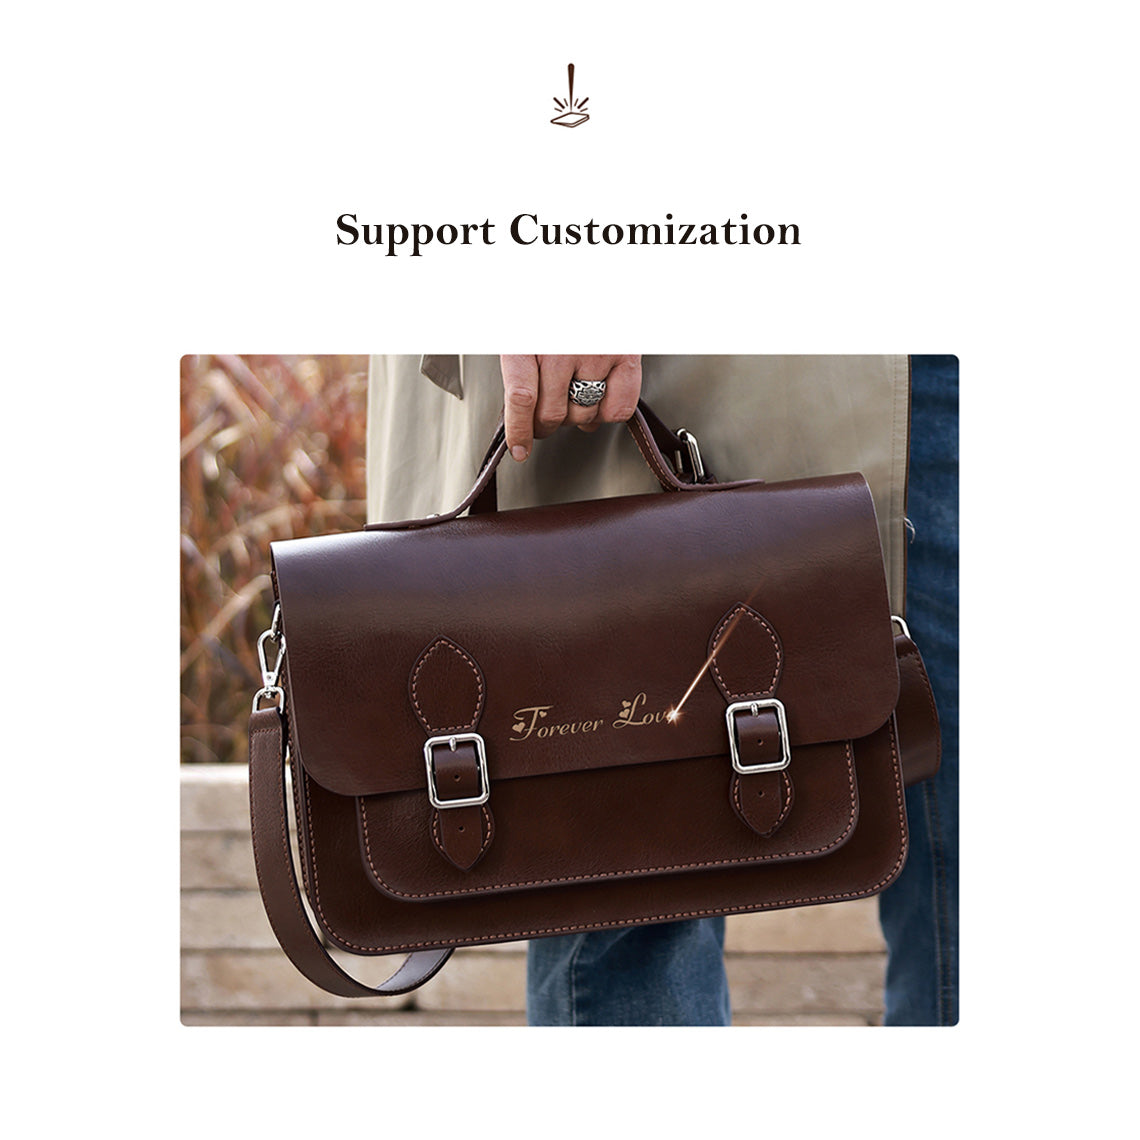 Personalized Leather Bag Unique Gift | Customized Design for Leather Bag DIY Kit Leather Engraving - POPSEWING™